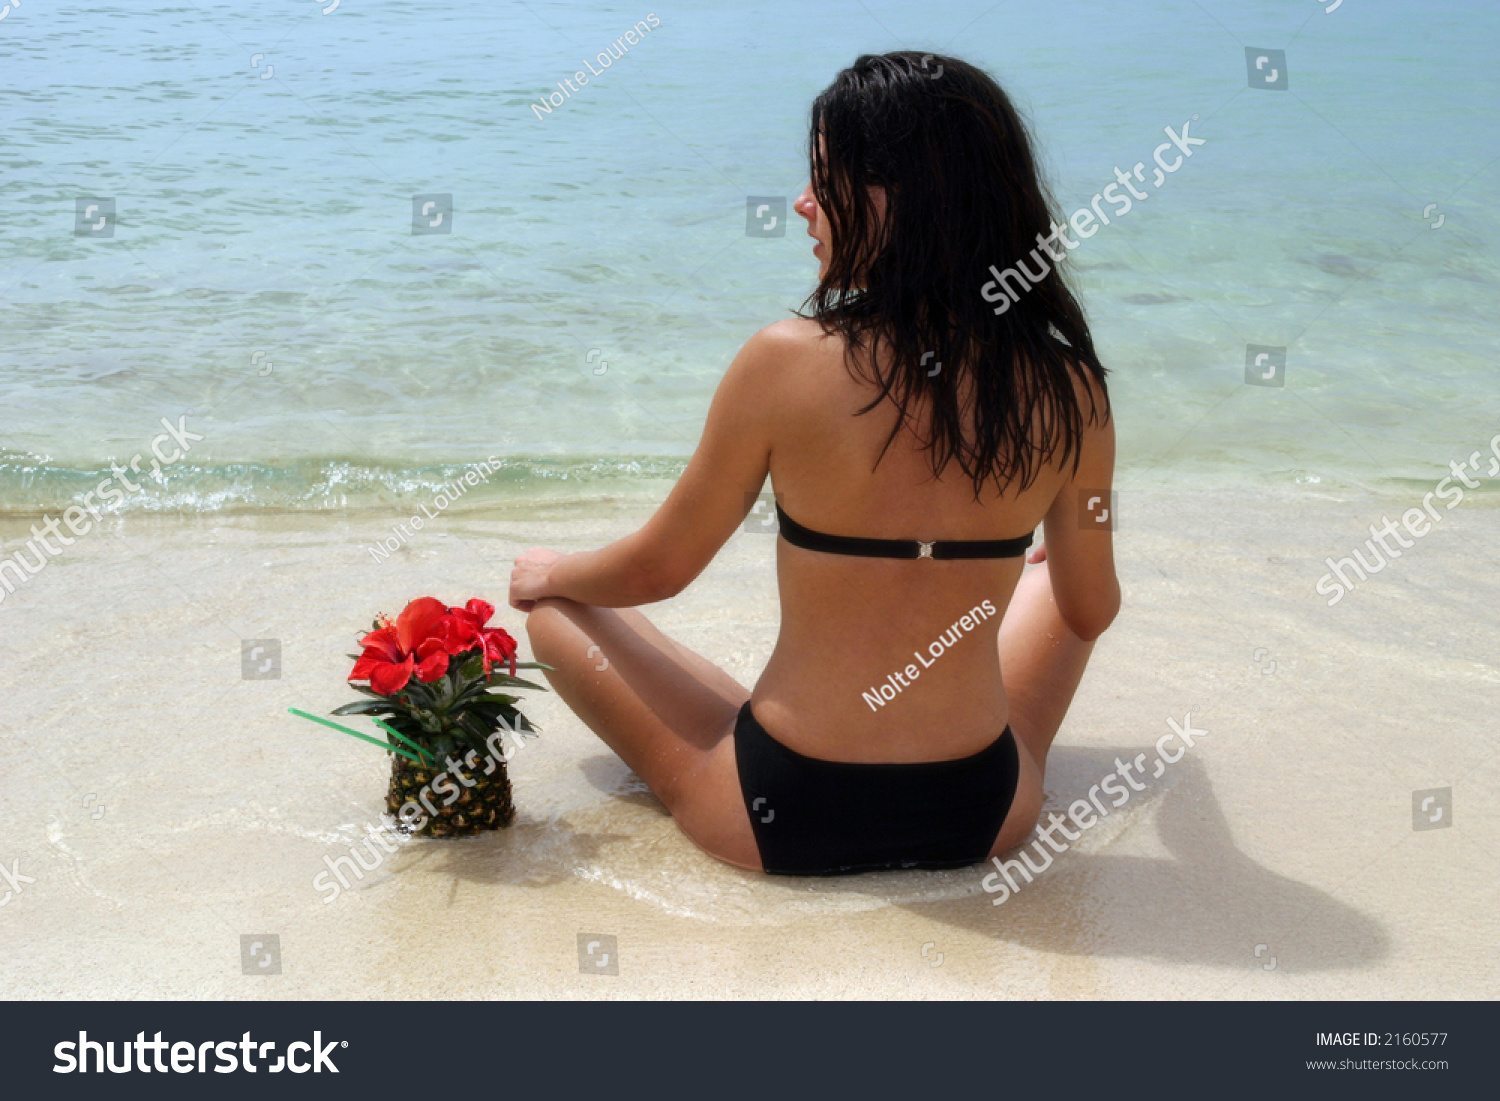 Woman Sitting On Beach Having A Pineapple Drink Staring At The Ocean Stock Photo